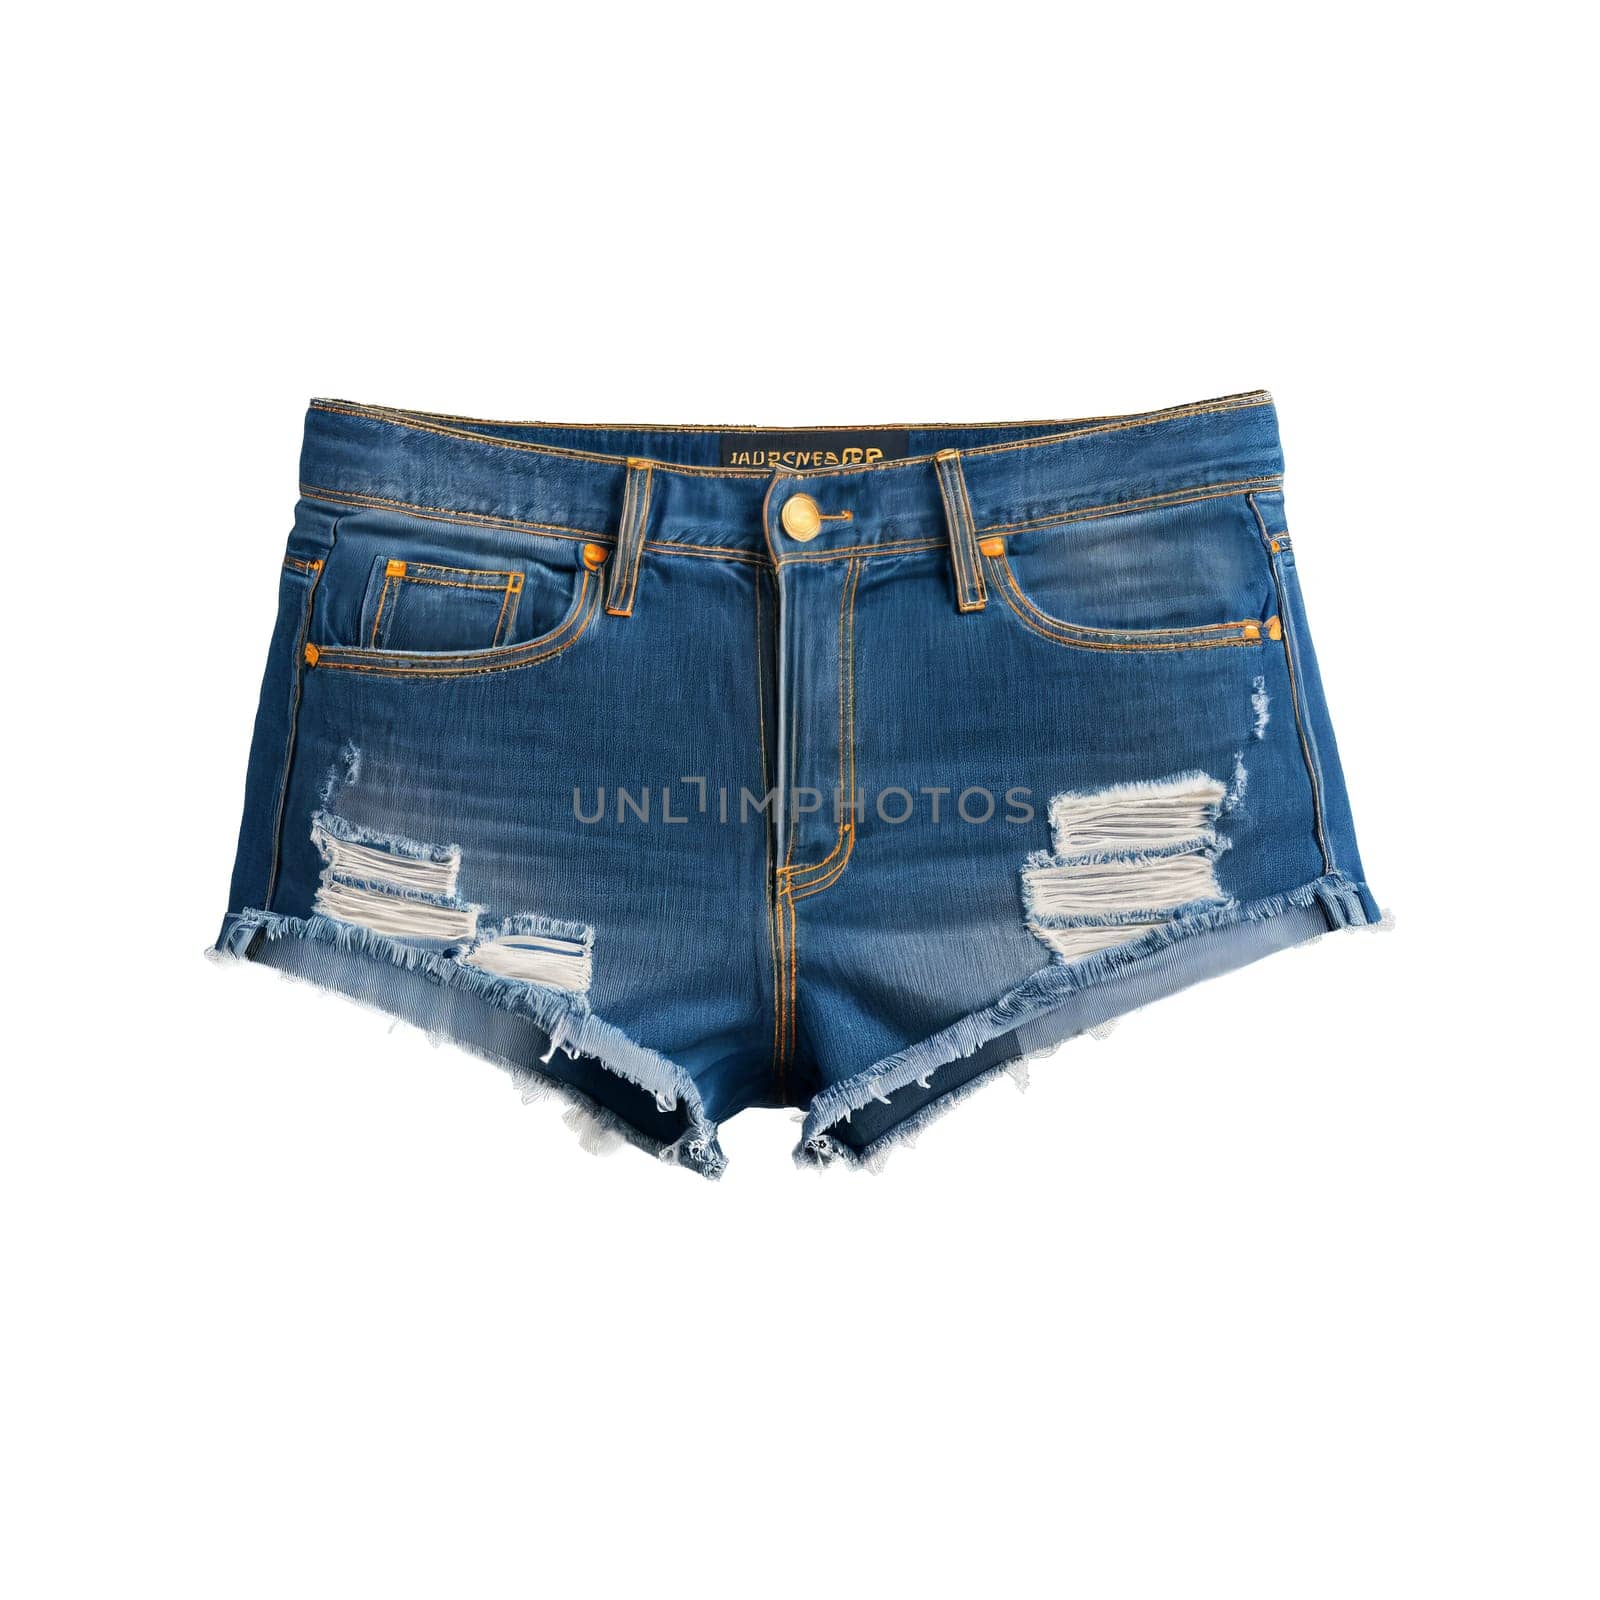 Edgy distressed denim shorts with frayed hems and a high waisted silhouette airborne Mockup concept by panophotograph